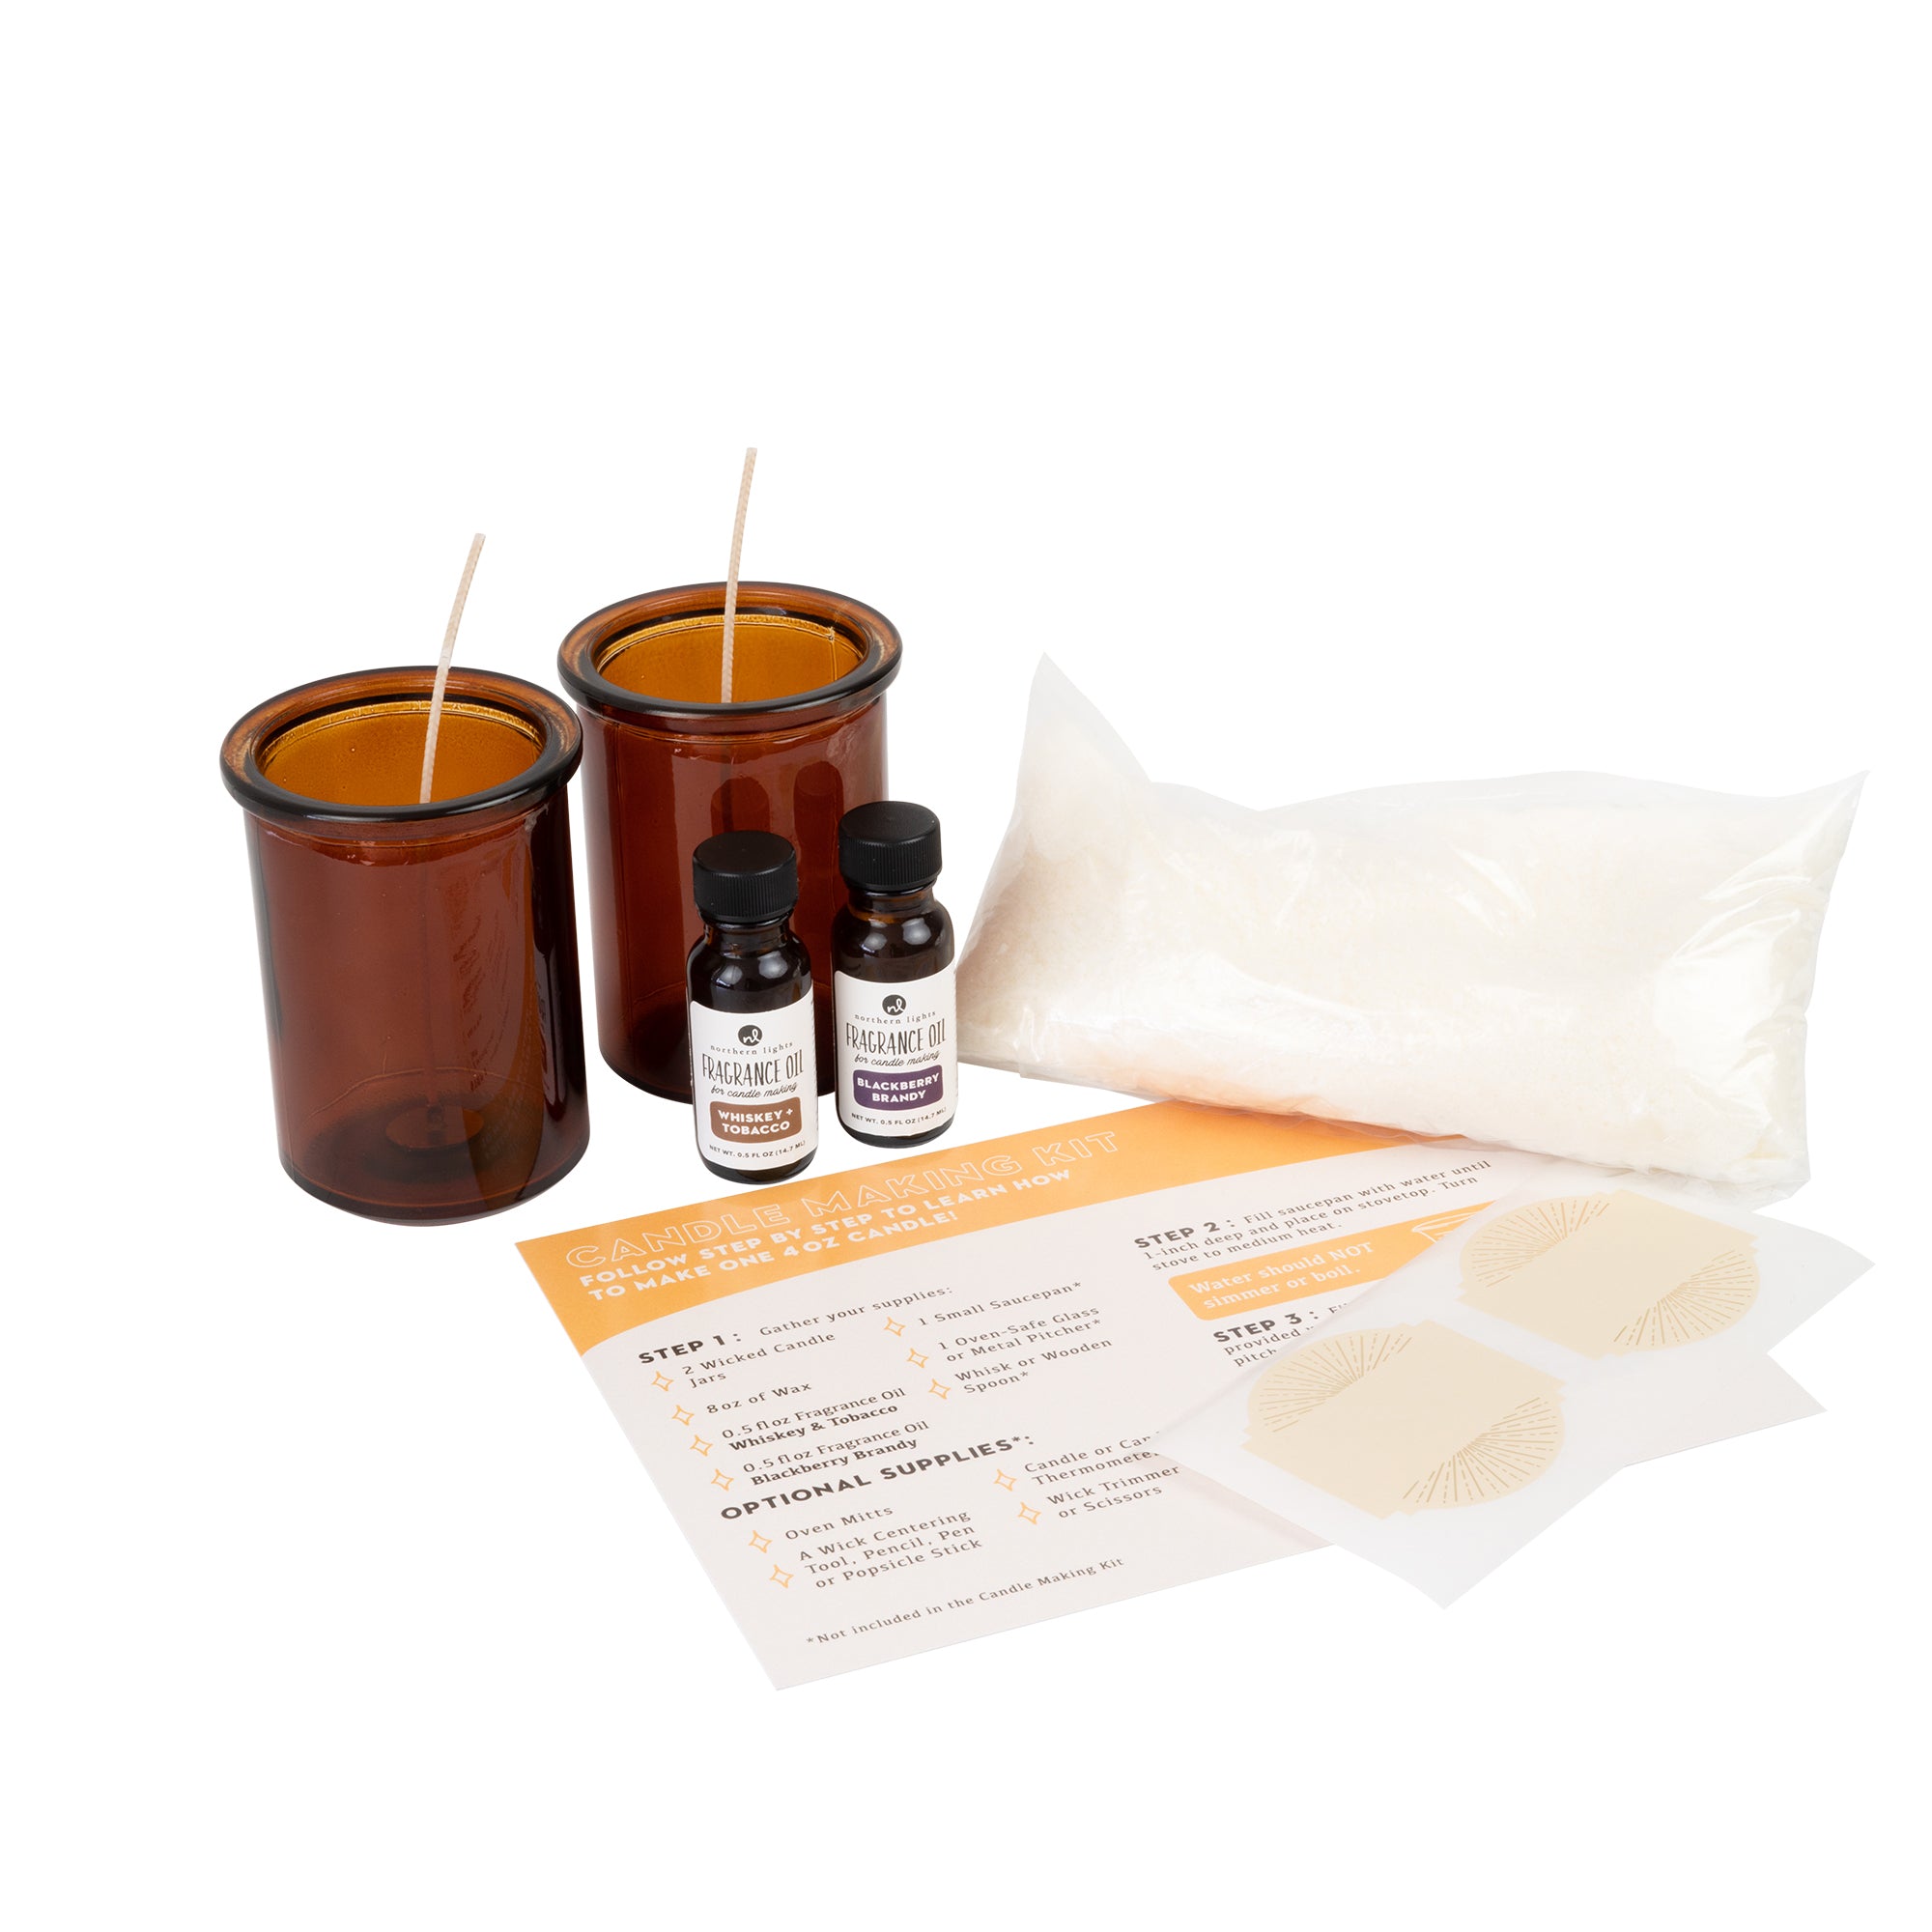 Candle Making Kits for sale in Scotland, Florida